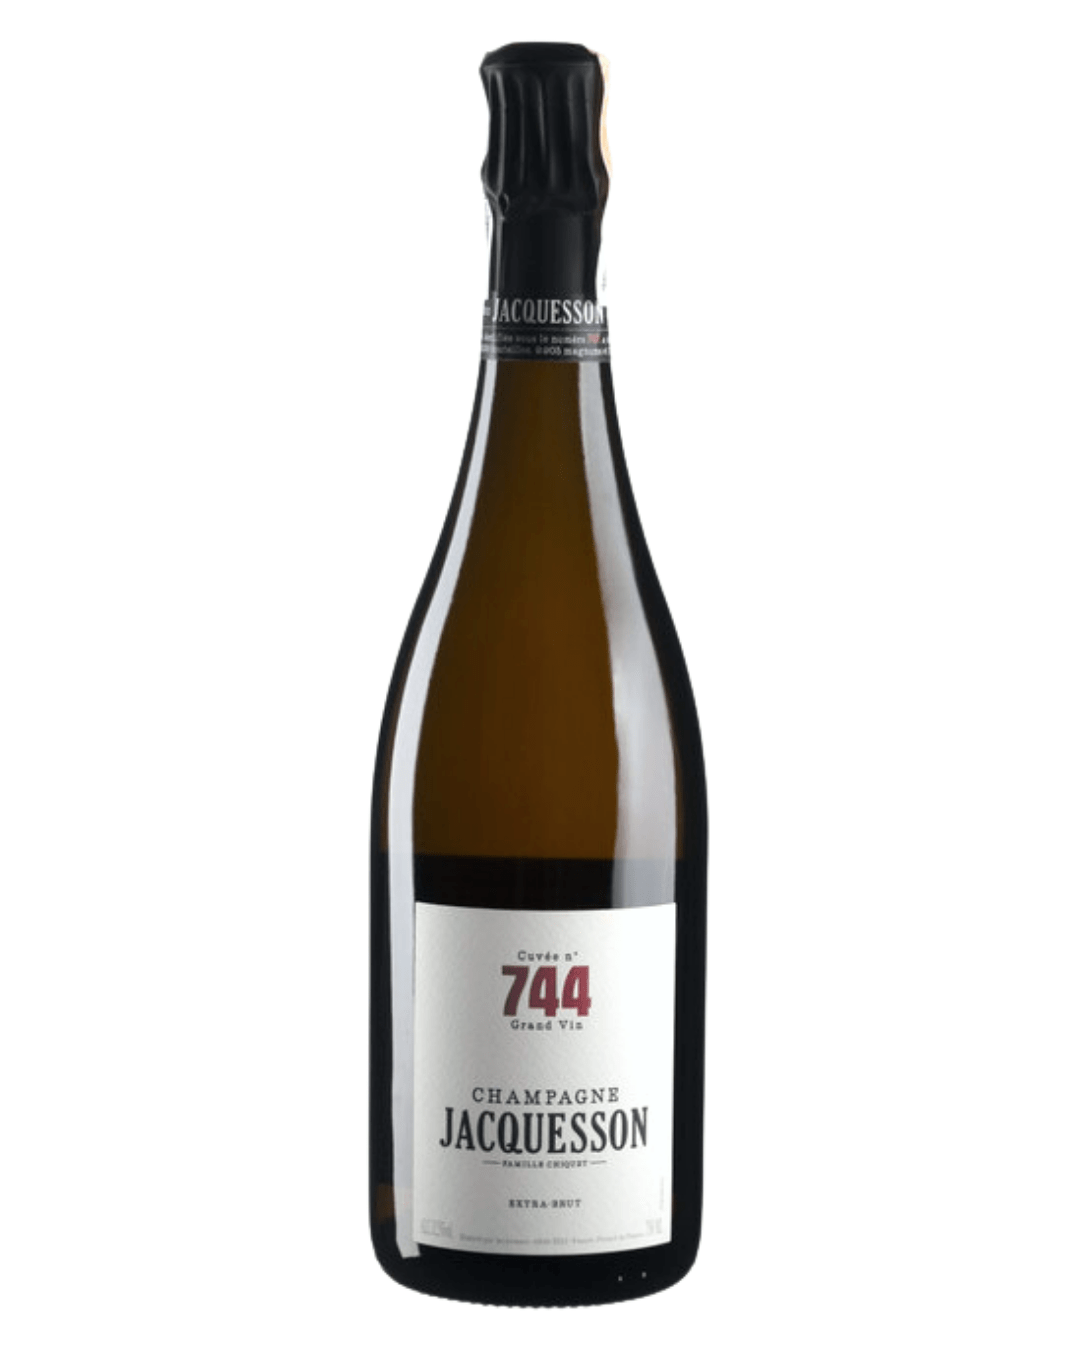 Shop Champagne Jacquesson Champagne Jacquesson Cuvee 744 online at PENTICTON artisanal French wine store in Hong Kong. Discover other French wines, promotions, workshops and featured offers at pentictonpacific.com 